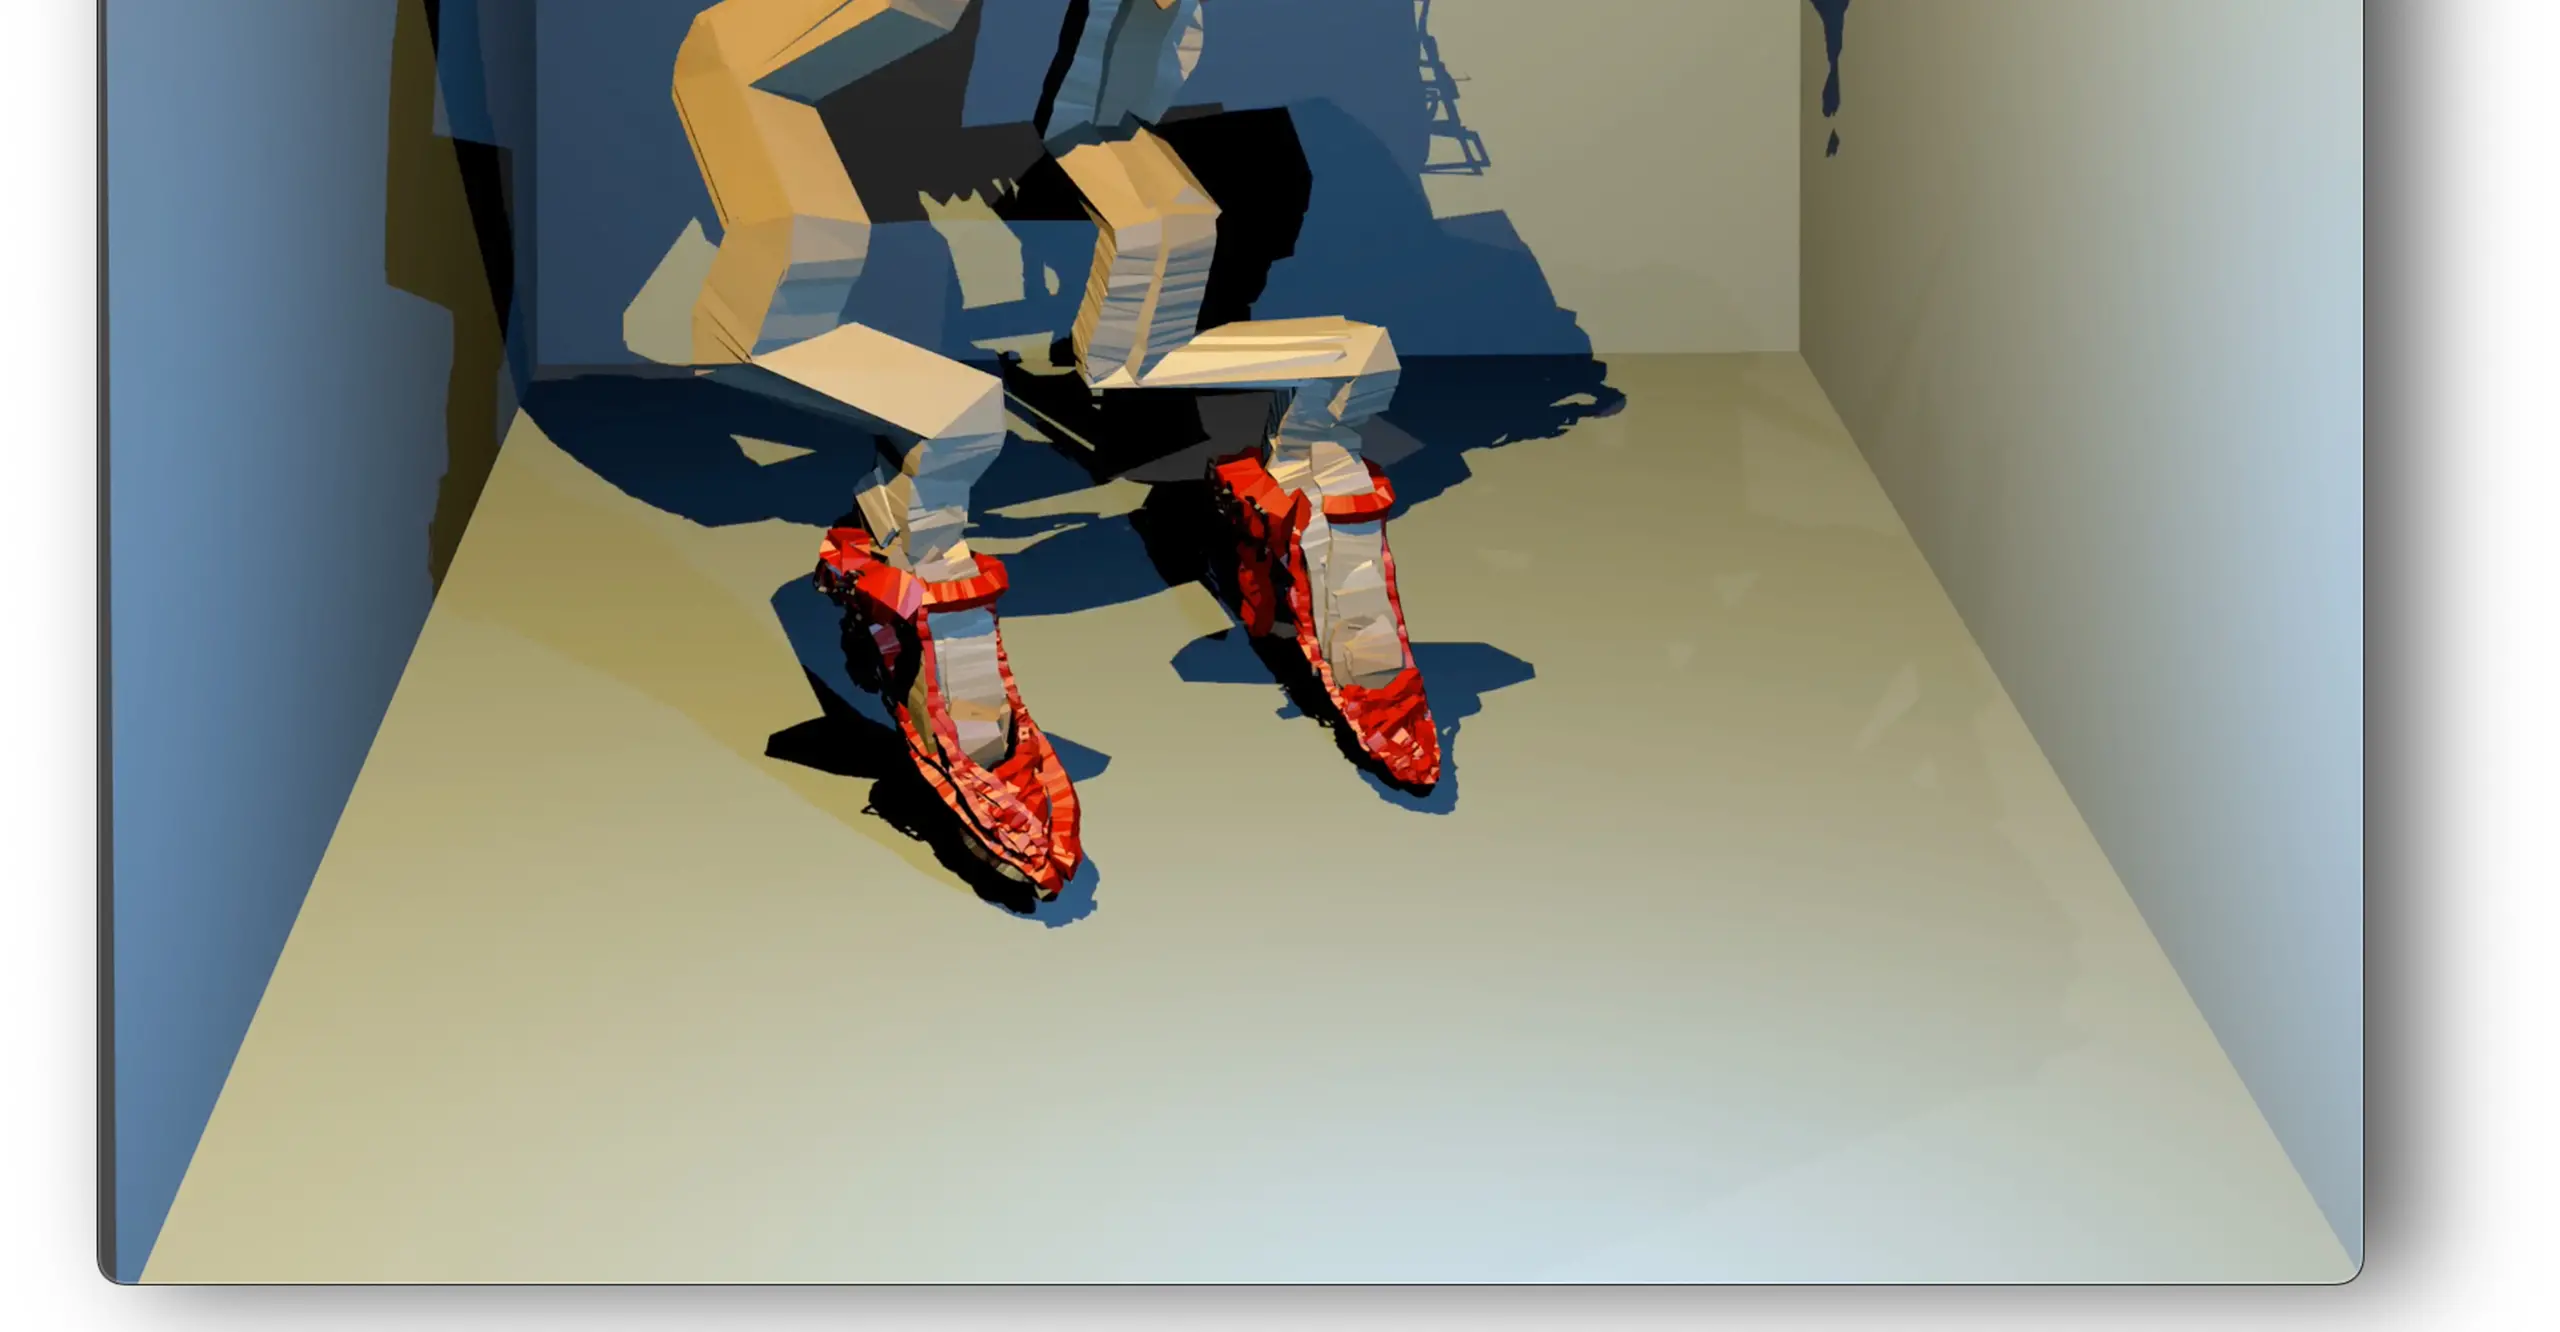 Wobbly, digitally painted legs in red high heeled shoes